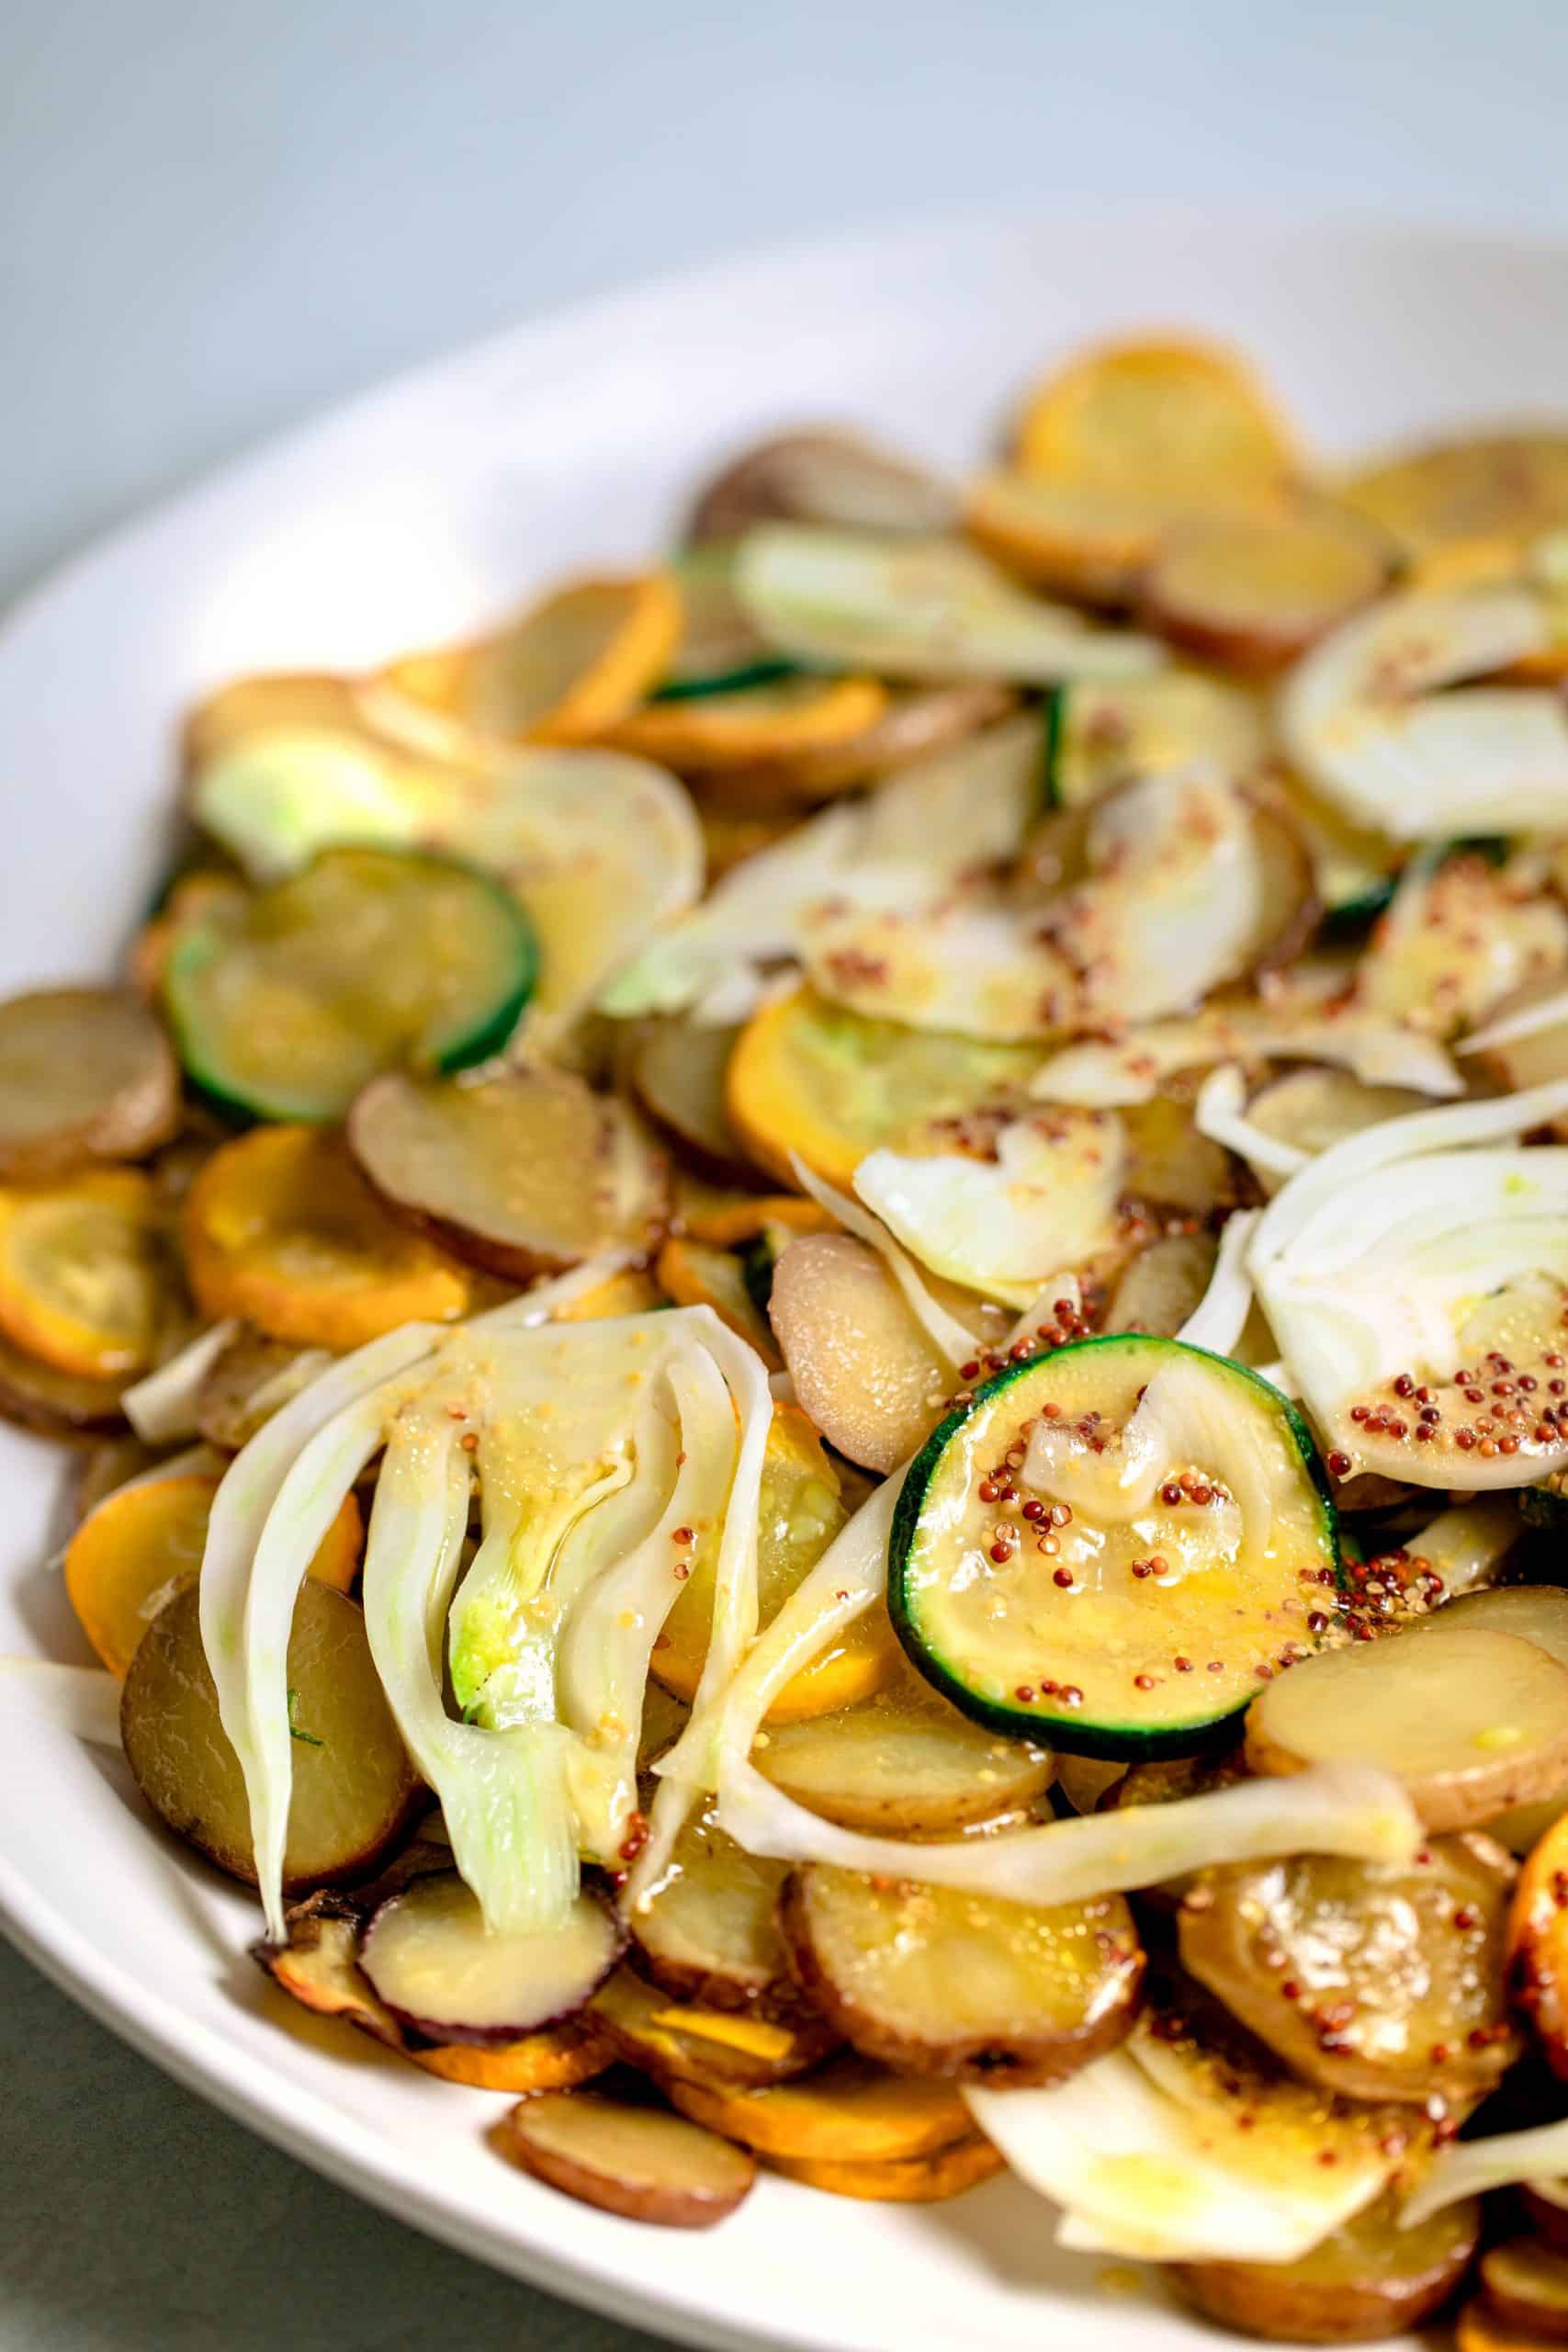 A close up photo of the roasted zucchini salad